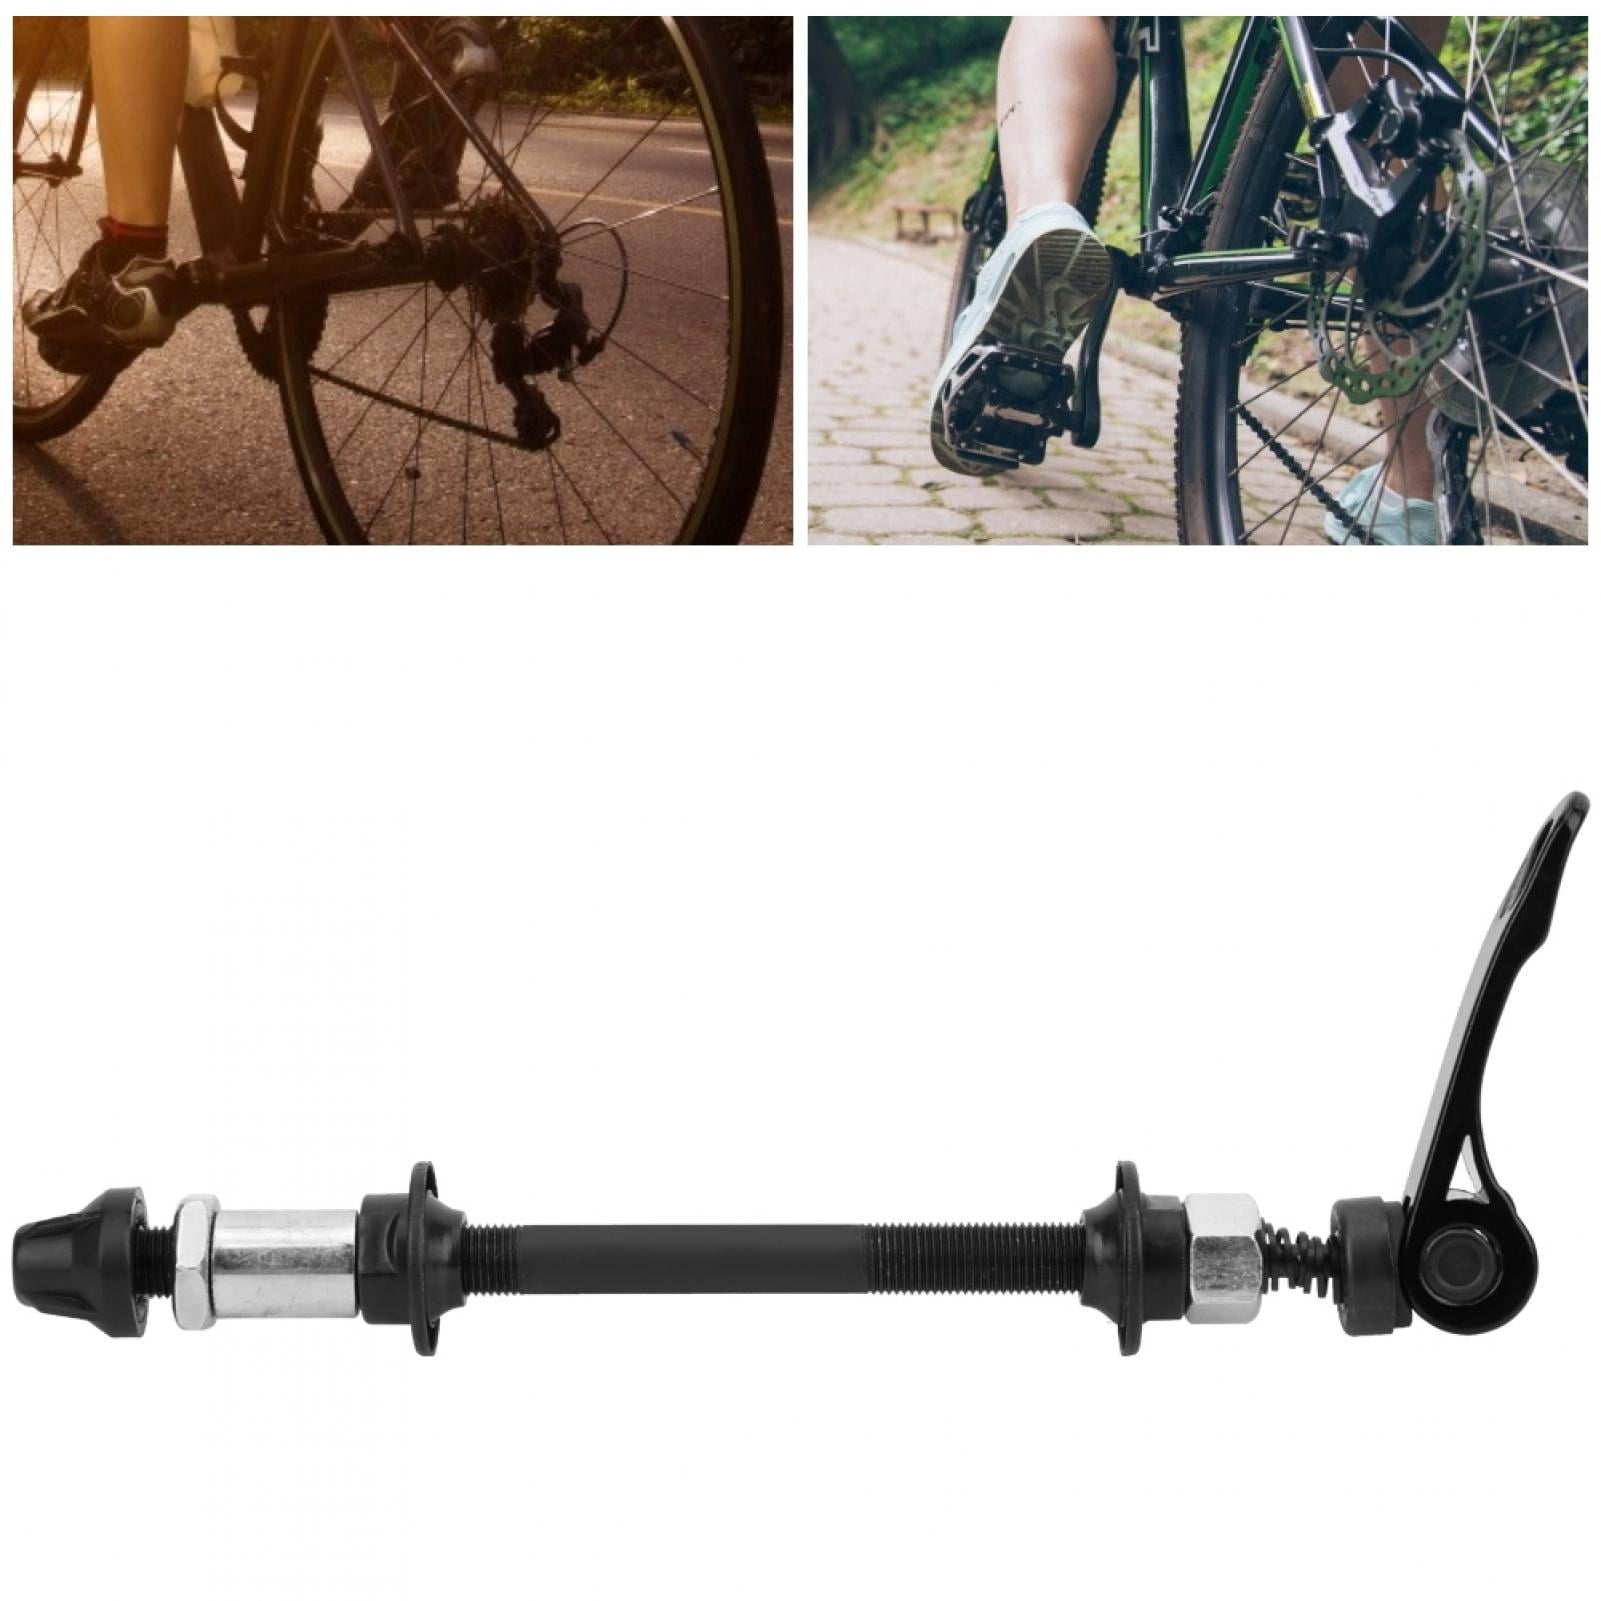 Strong and Durable Light Weight Stable Performance High Reliability Steel Hub Axle Rear Axle Bicycle Hub Axle for Riding Best Gift Bicycle Hub Axle Cyclists 